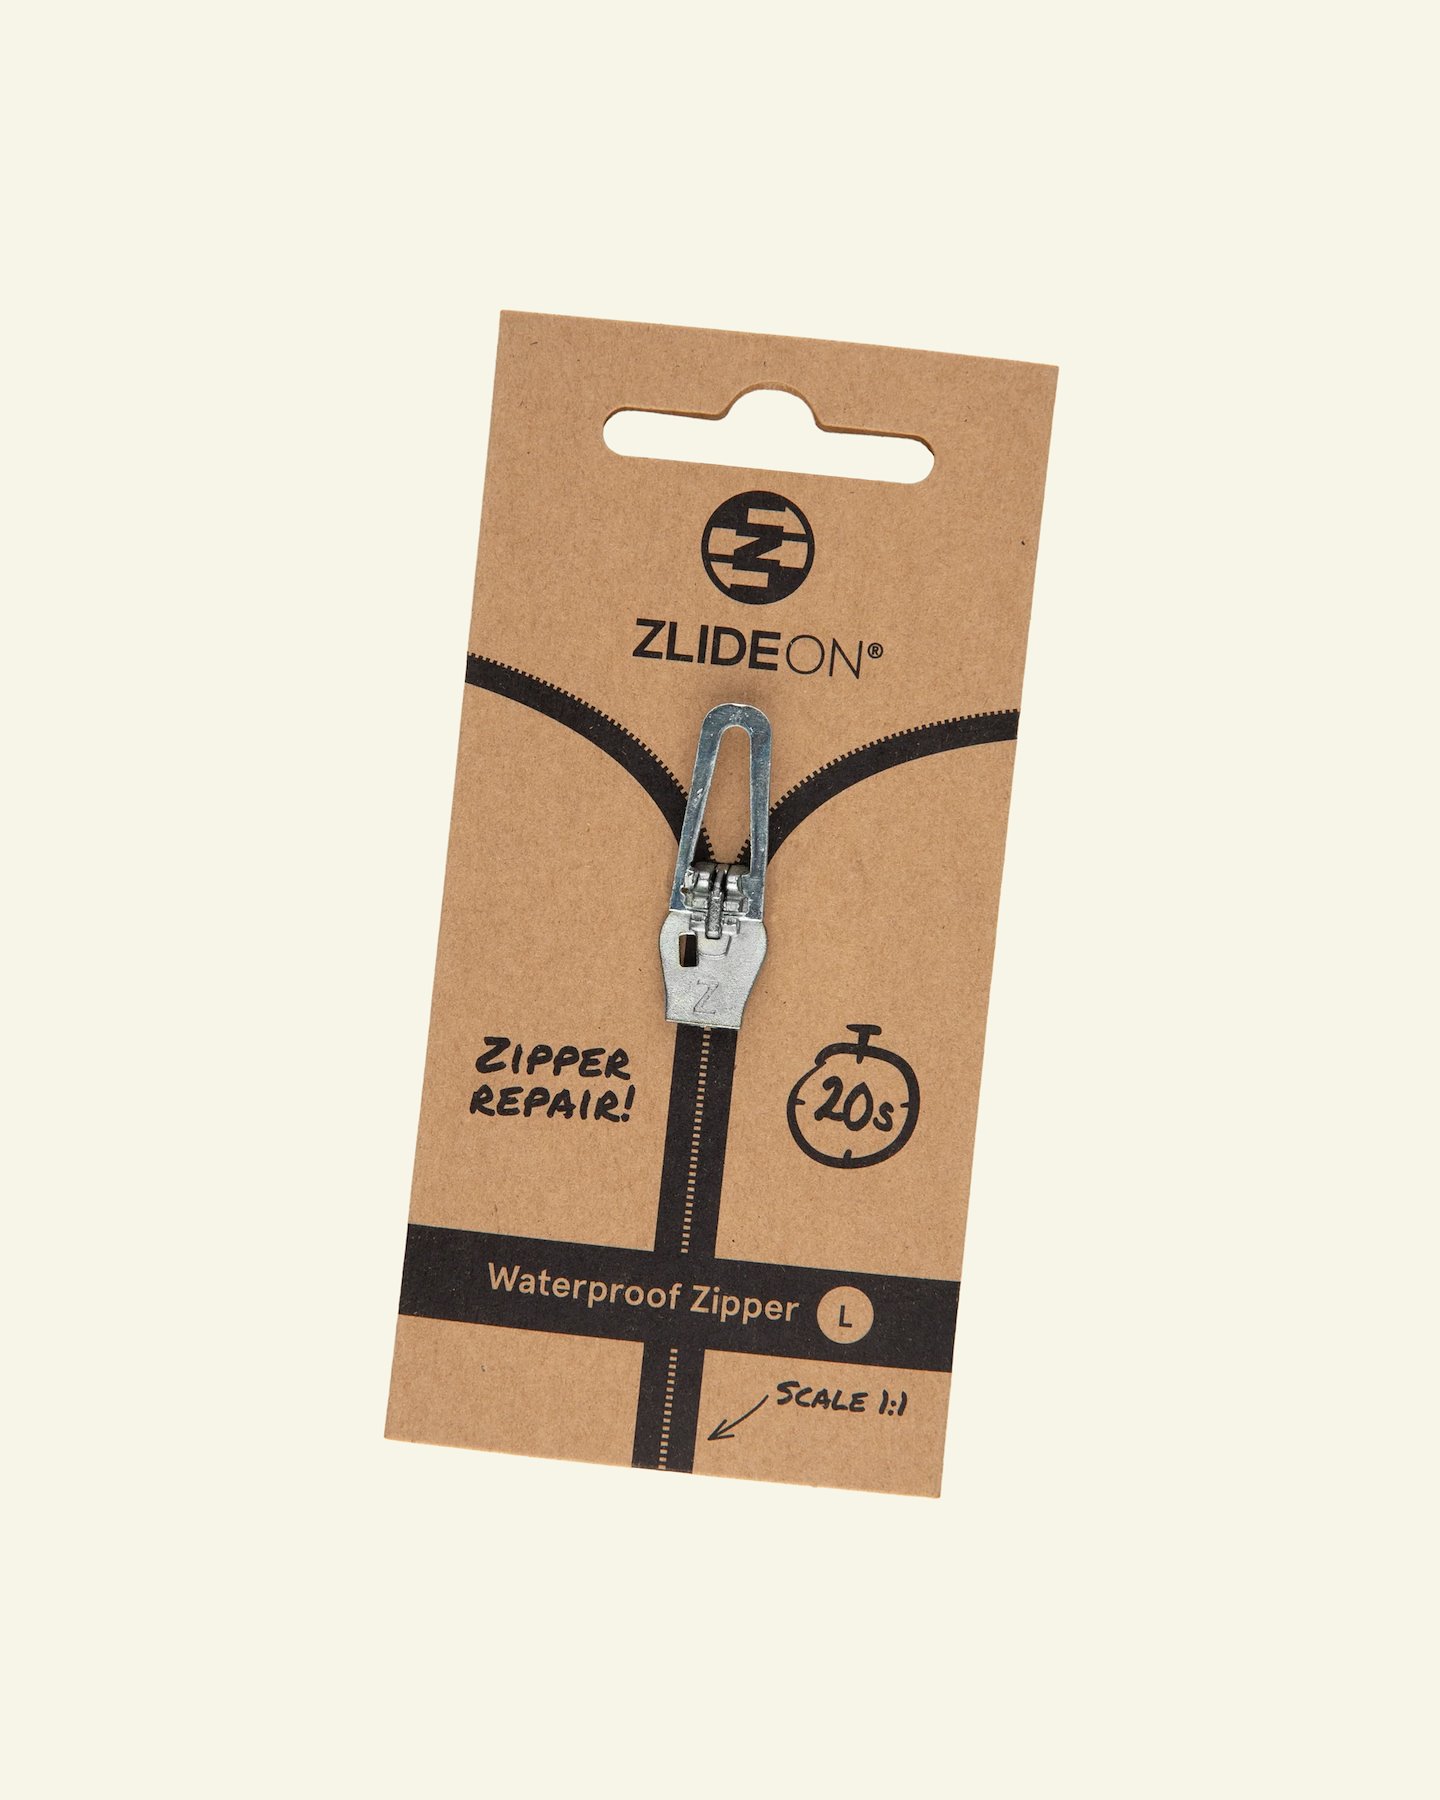 ZlideOn for waterproof zippers L silver x40630_pack.png